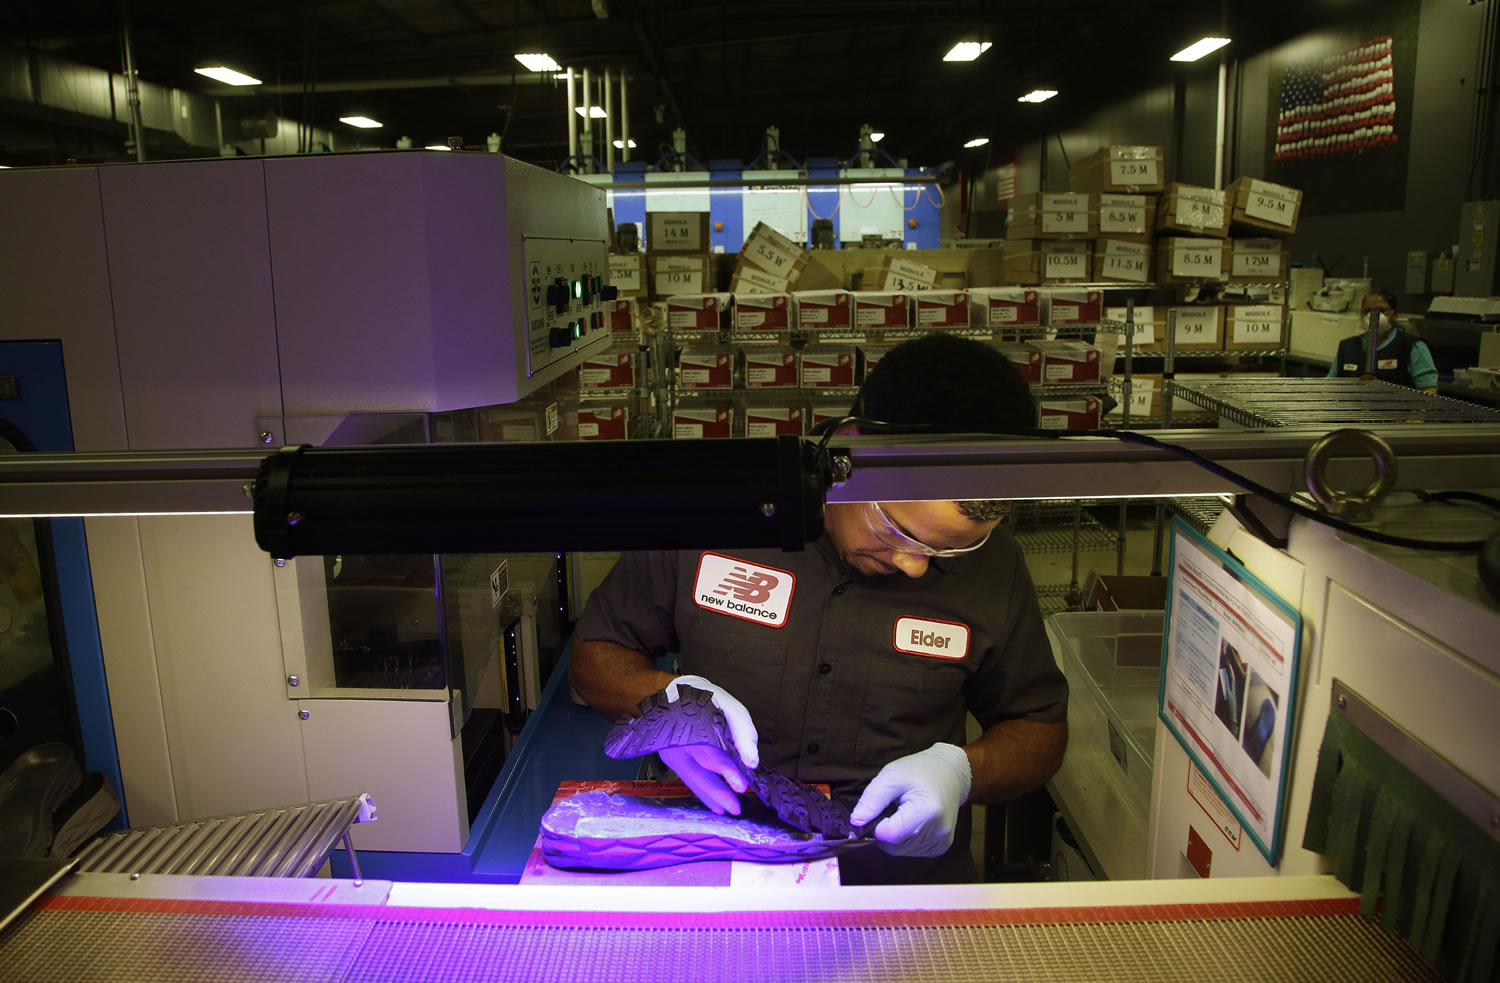 Elder Brandao, working under ultraviolet lights, glues an outsole to a midsole of the New Balance proposed 950v2 sneaker, that has passed military testing, at one of company's manufacturing facilities in Boston.